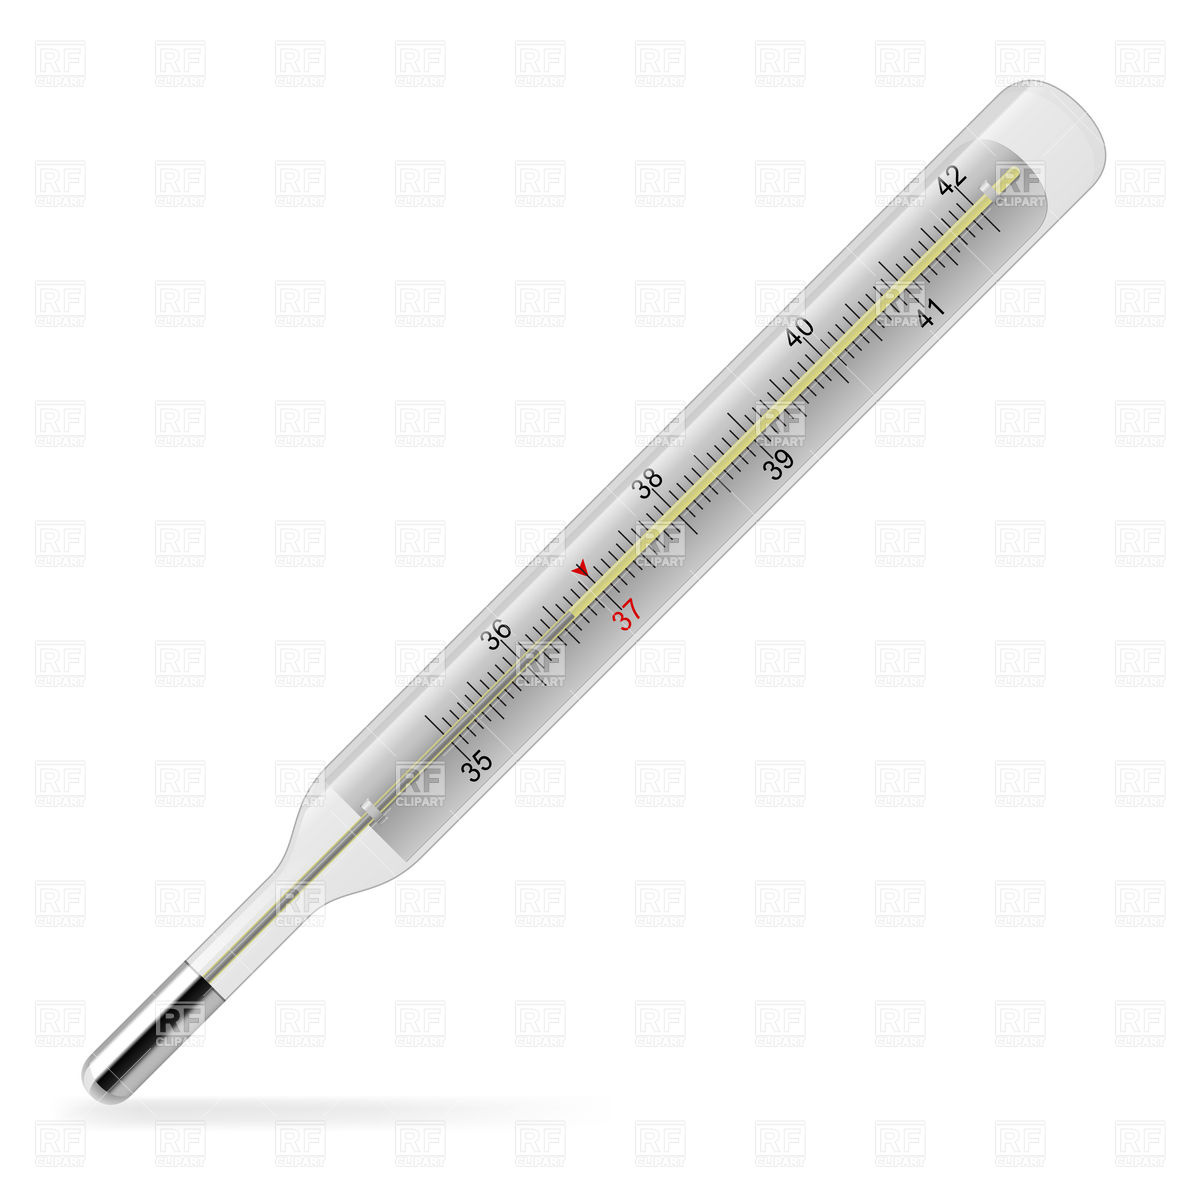 Mercury Filled Thermometer Download Royalty Free Vector Clipart  Eps